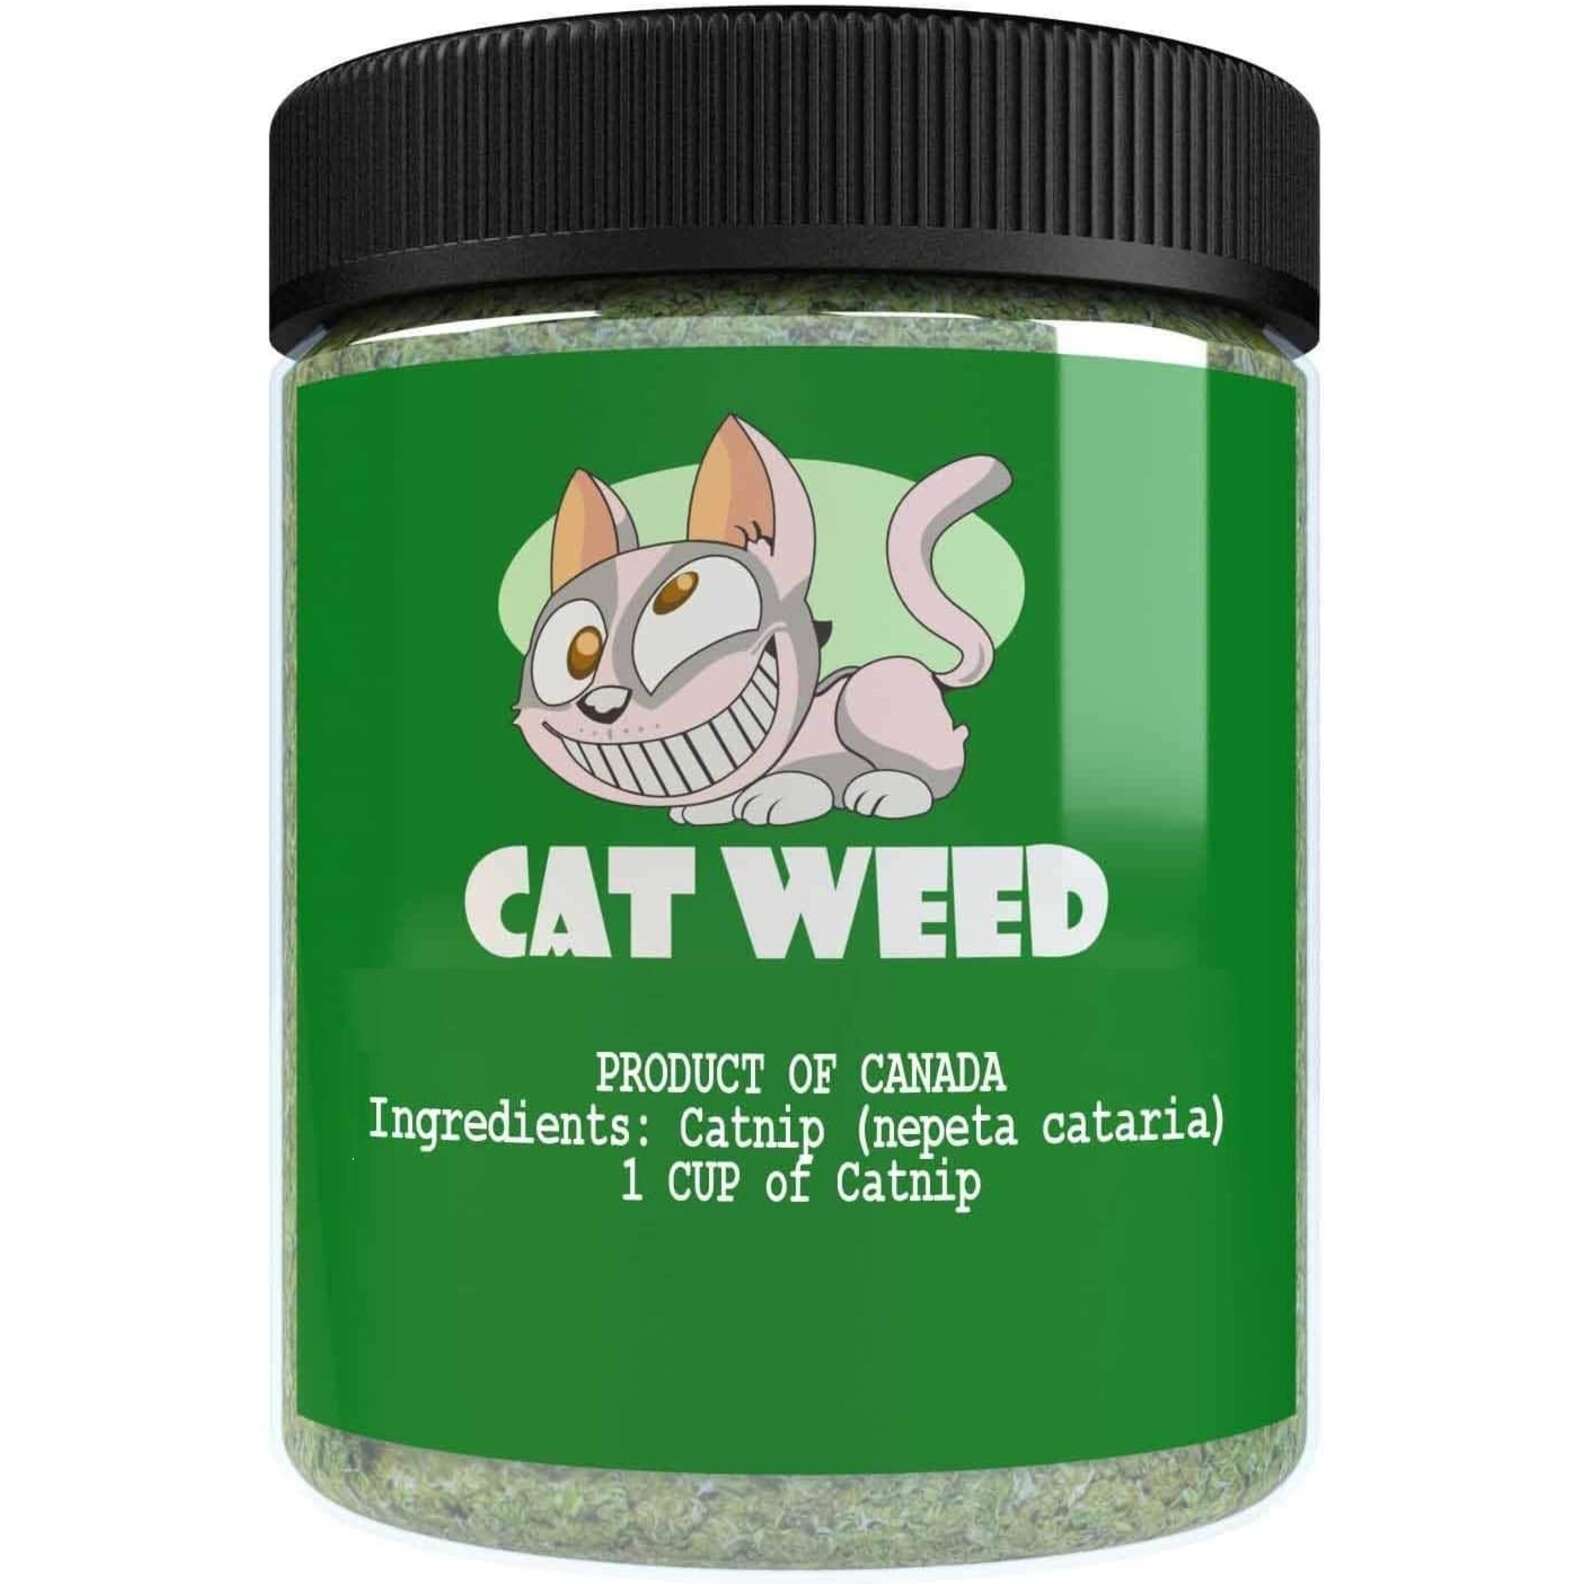 Weed and Catnip Products